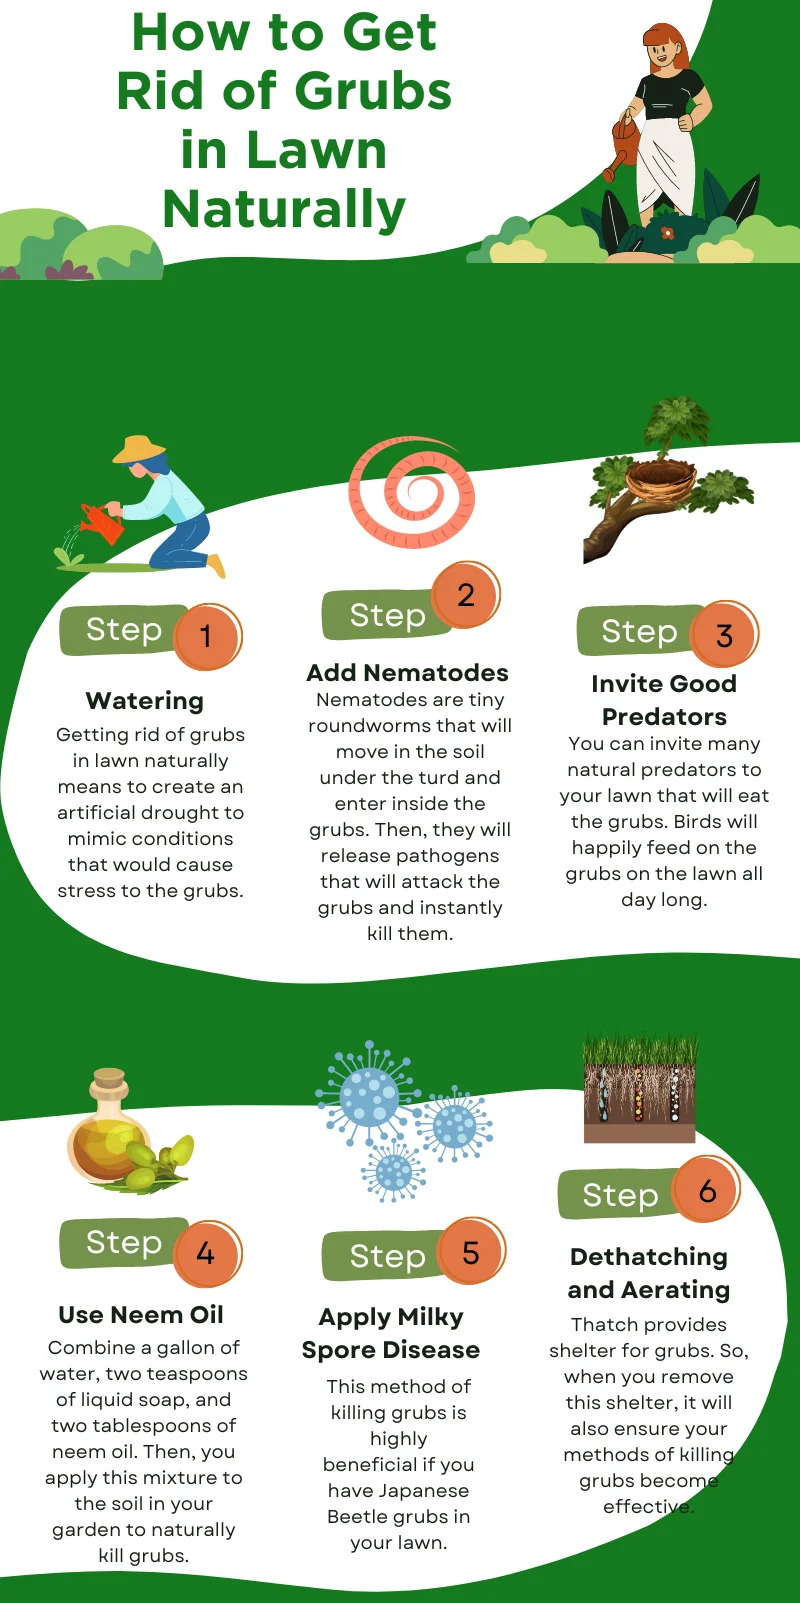 An infographic on how to get rid of grubs in lawn naturally